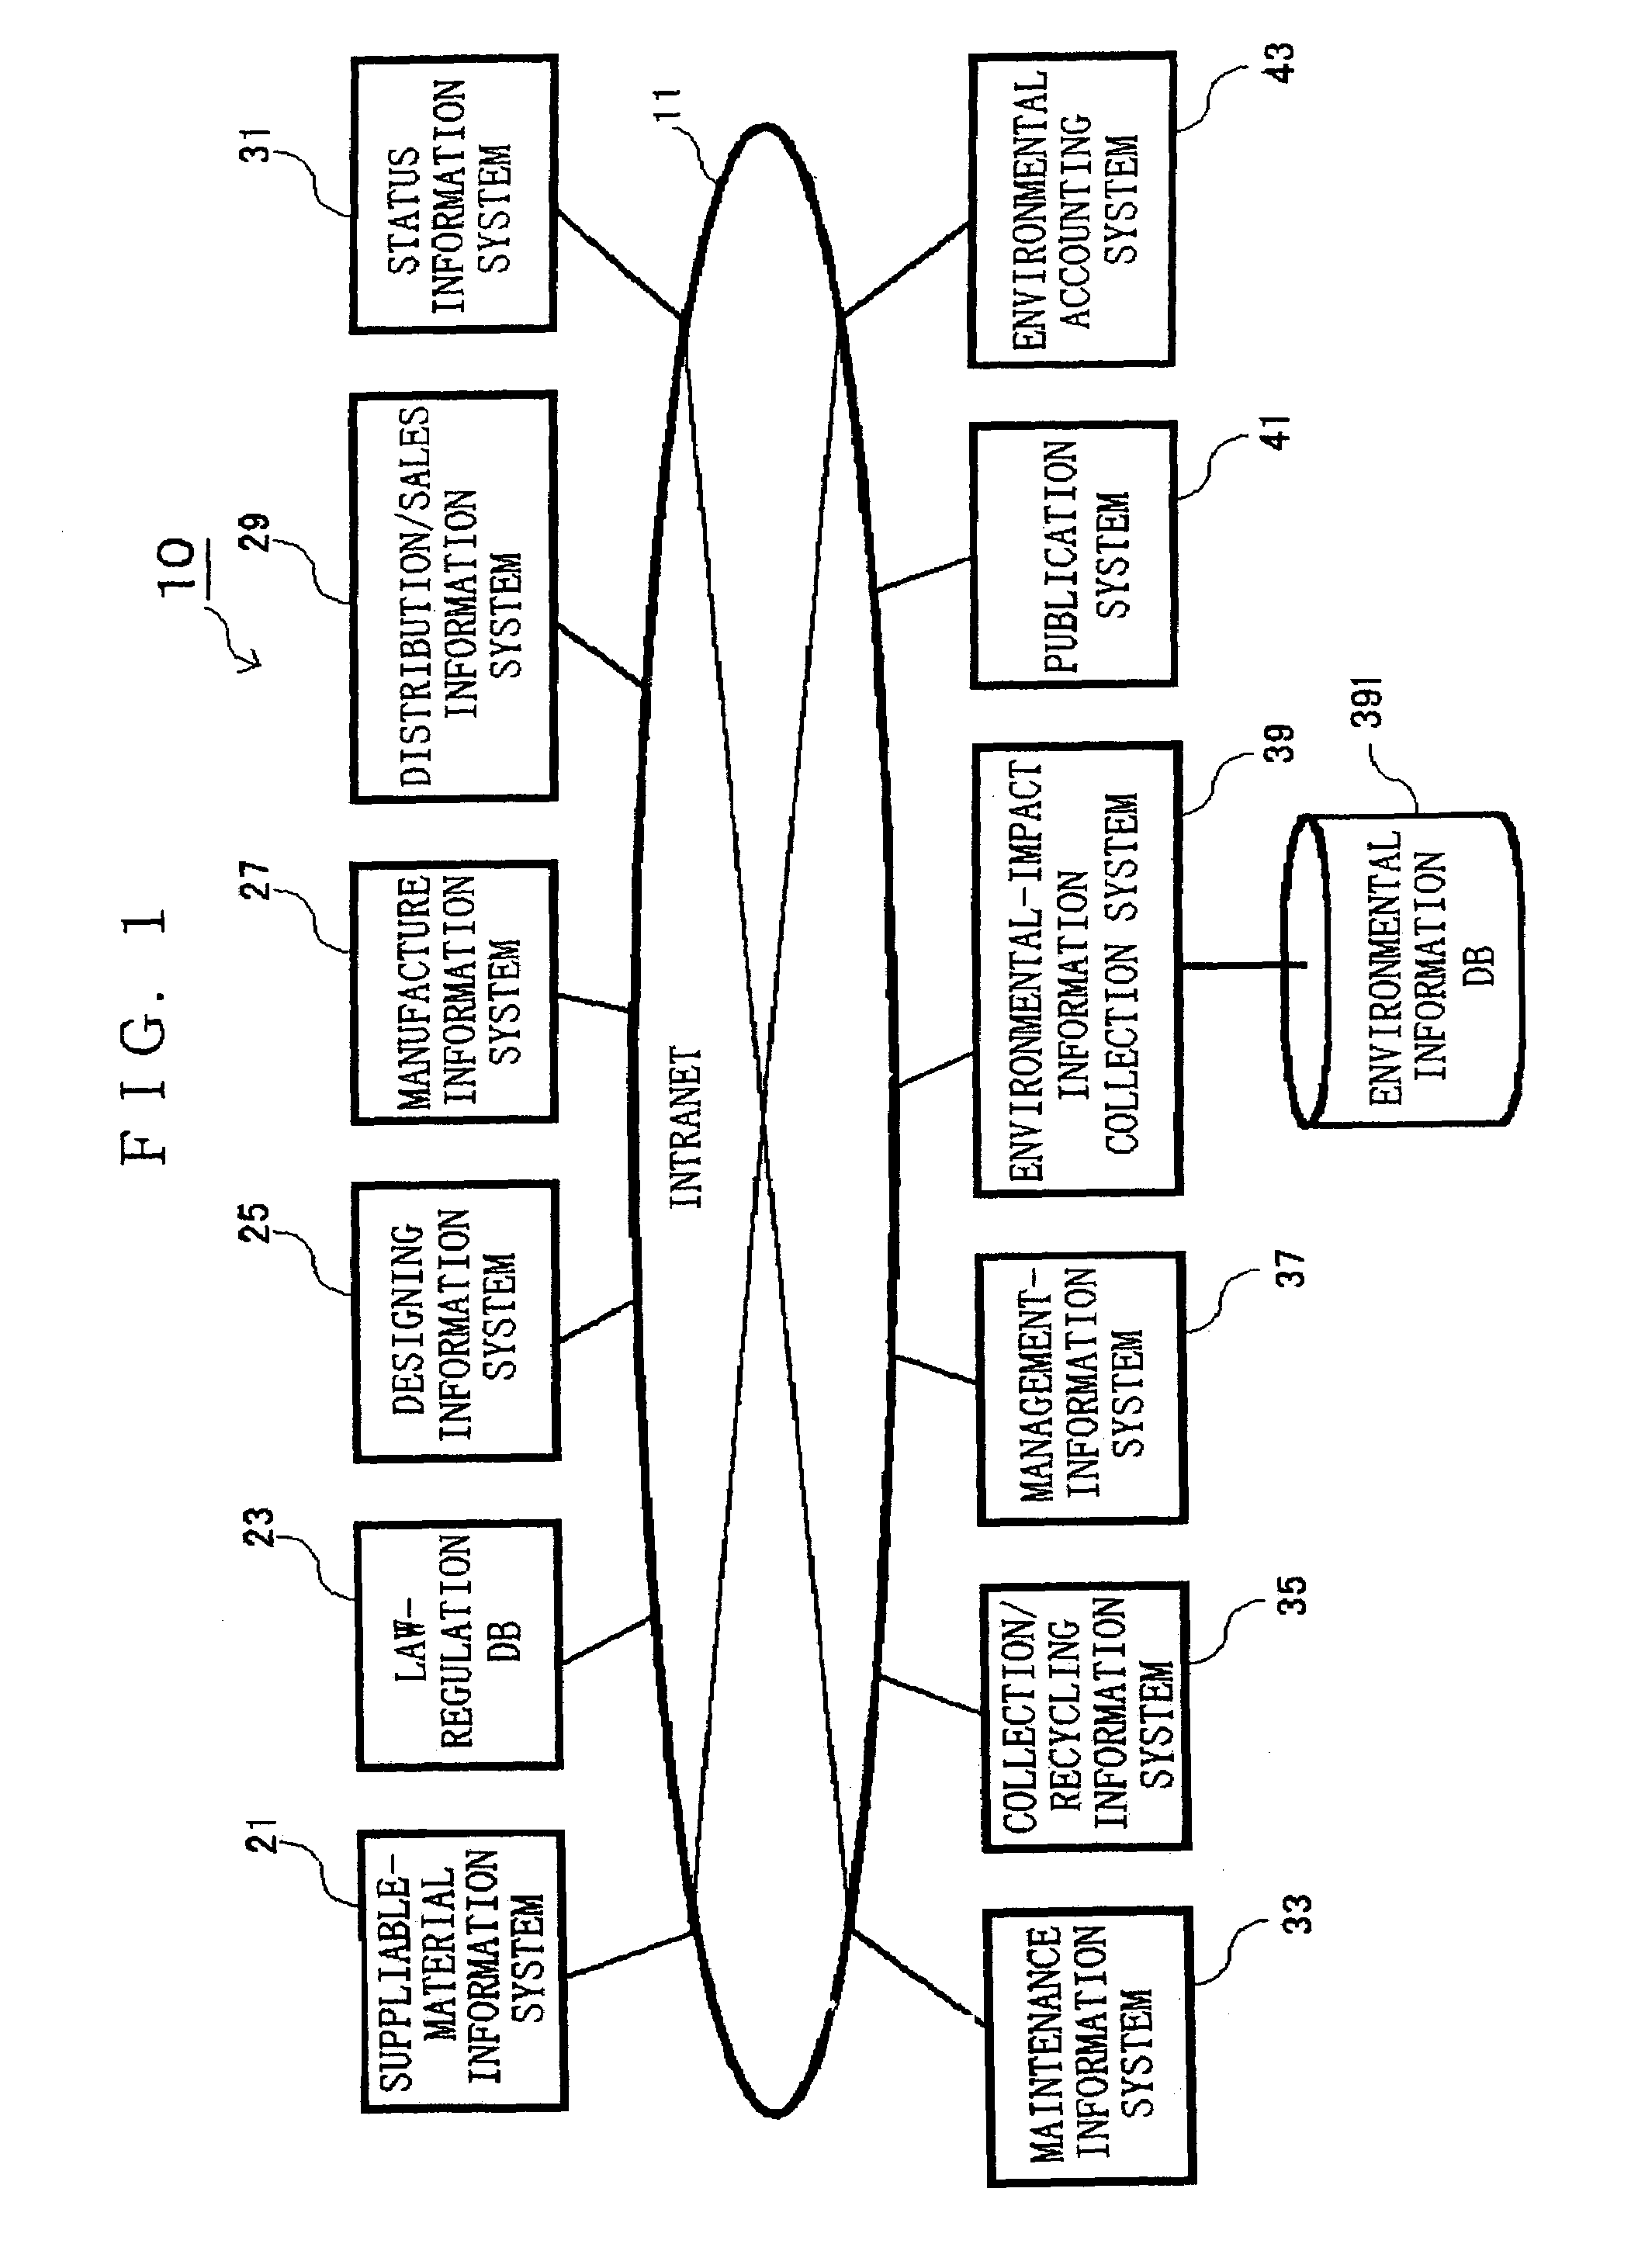 System and method for providing environmental management information, recording medium recording the information, and computer data signal